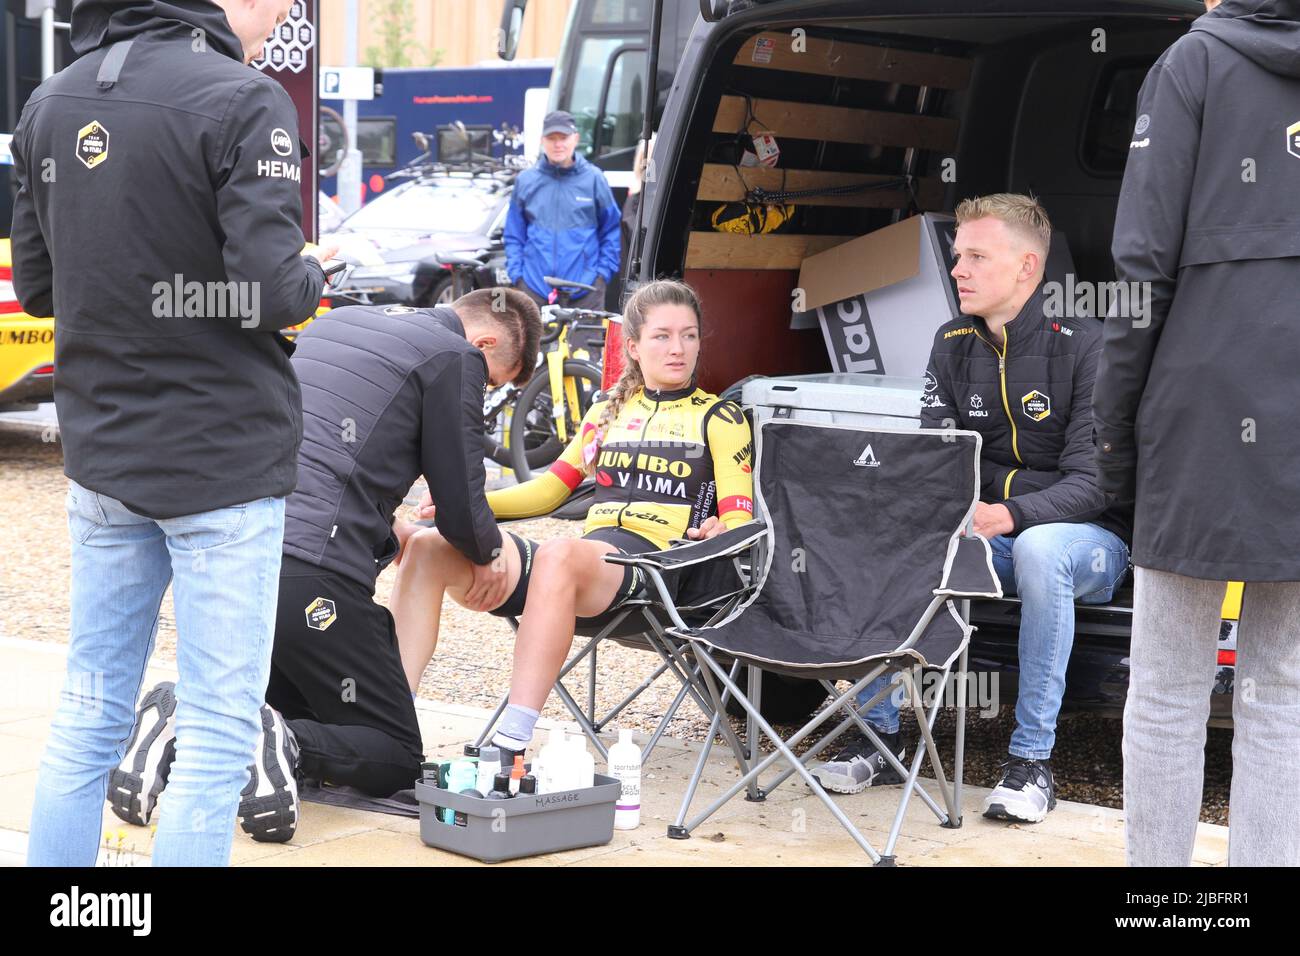 Colchester, UK. 06th Jun 2022. Stage One of the Women's Tour gets underway from the Sports Park at Northern Gateway in Colchester, finishing later today in Bury St. Edmunds. Karlijn Swinkels of Team Jumbo-Visma getting some last minute massage therapy in preparation for the race. Credit: Eastern Views/Alamy Live News Stock Photo